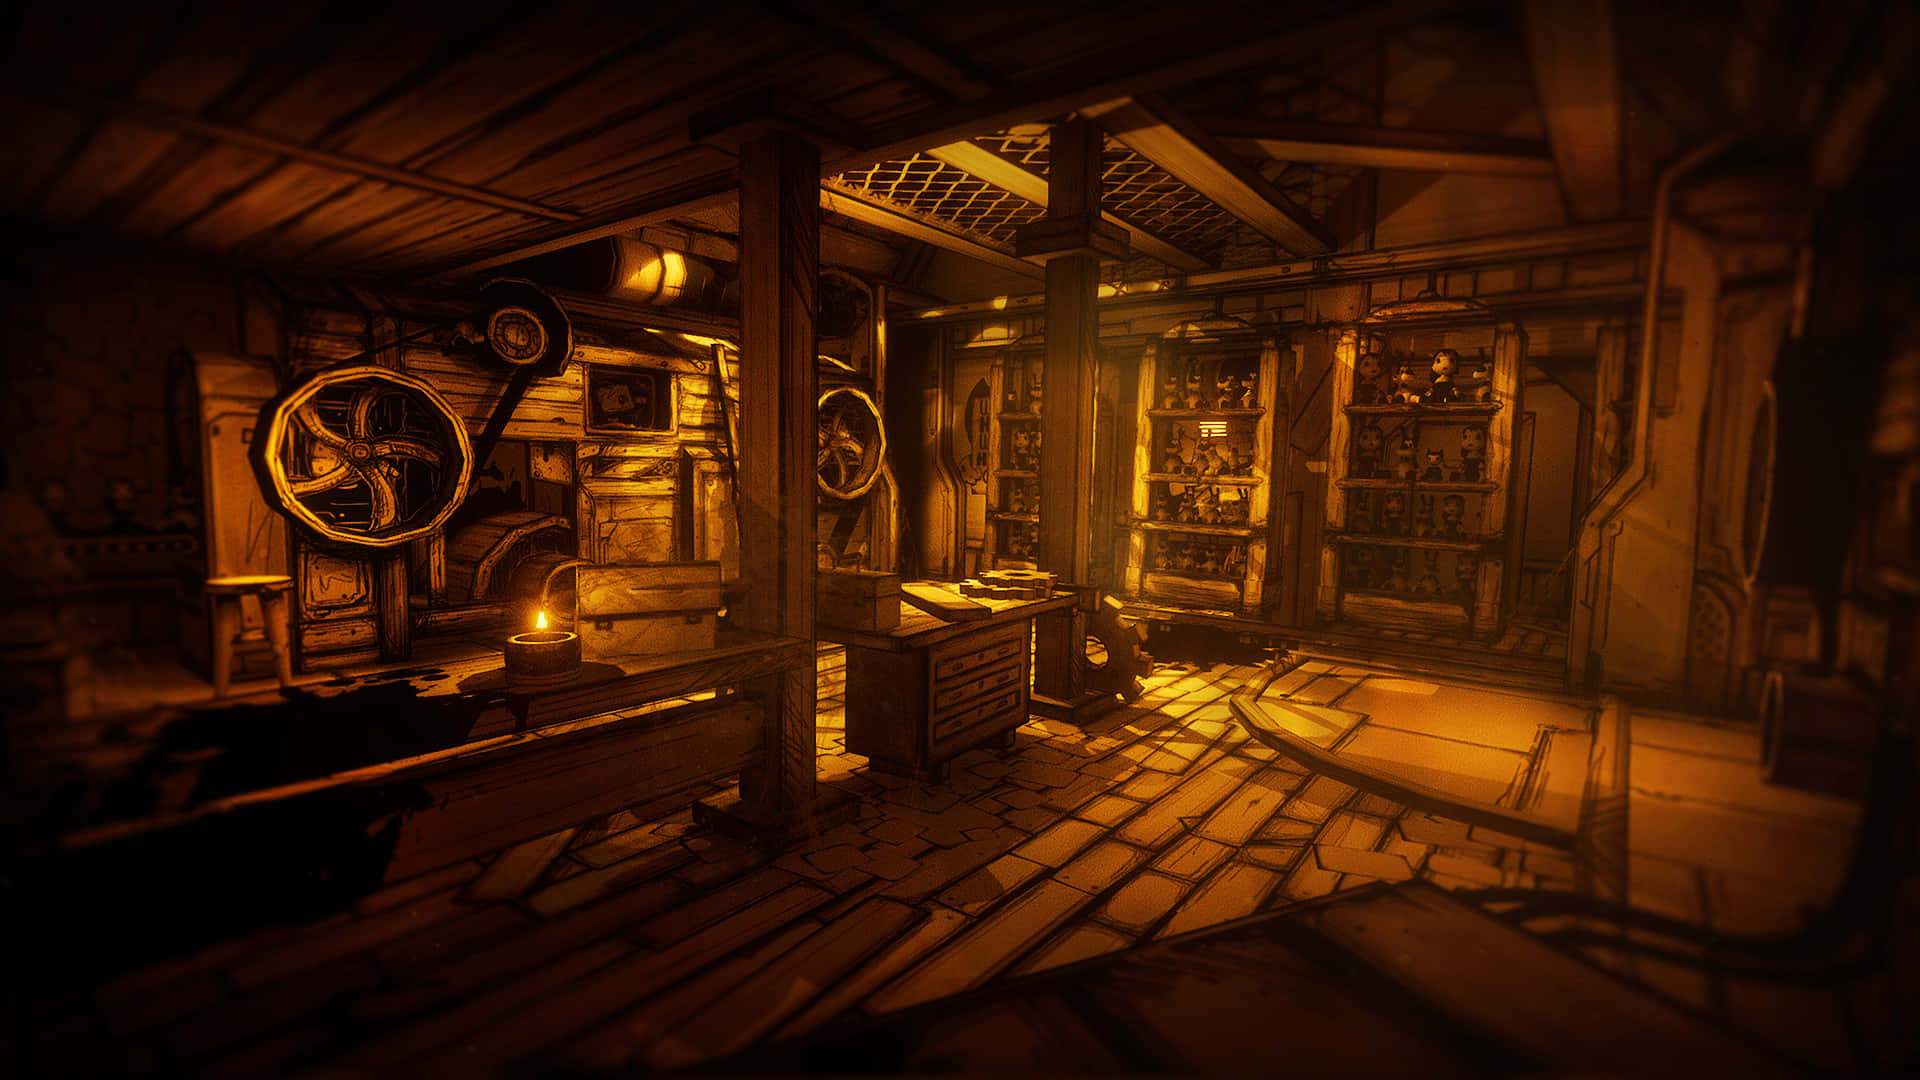 Image  "Explore a twisted cartoon world in Bendy and the Ink Machine"